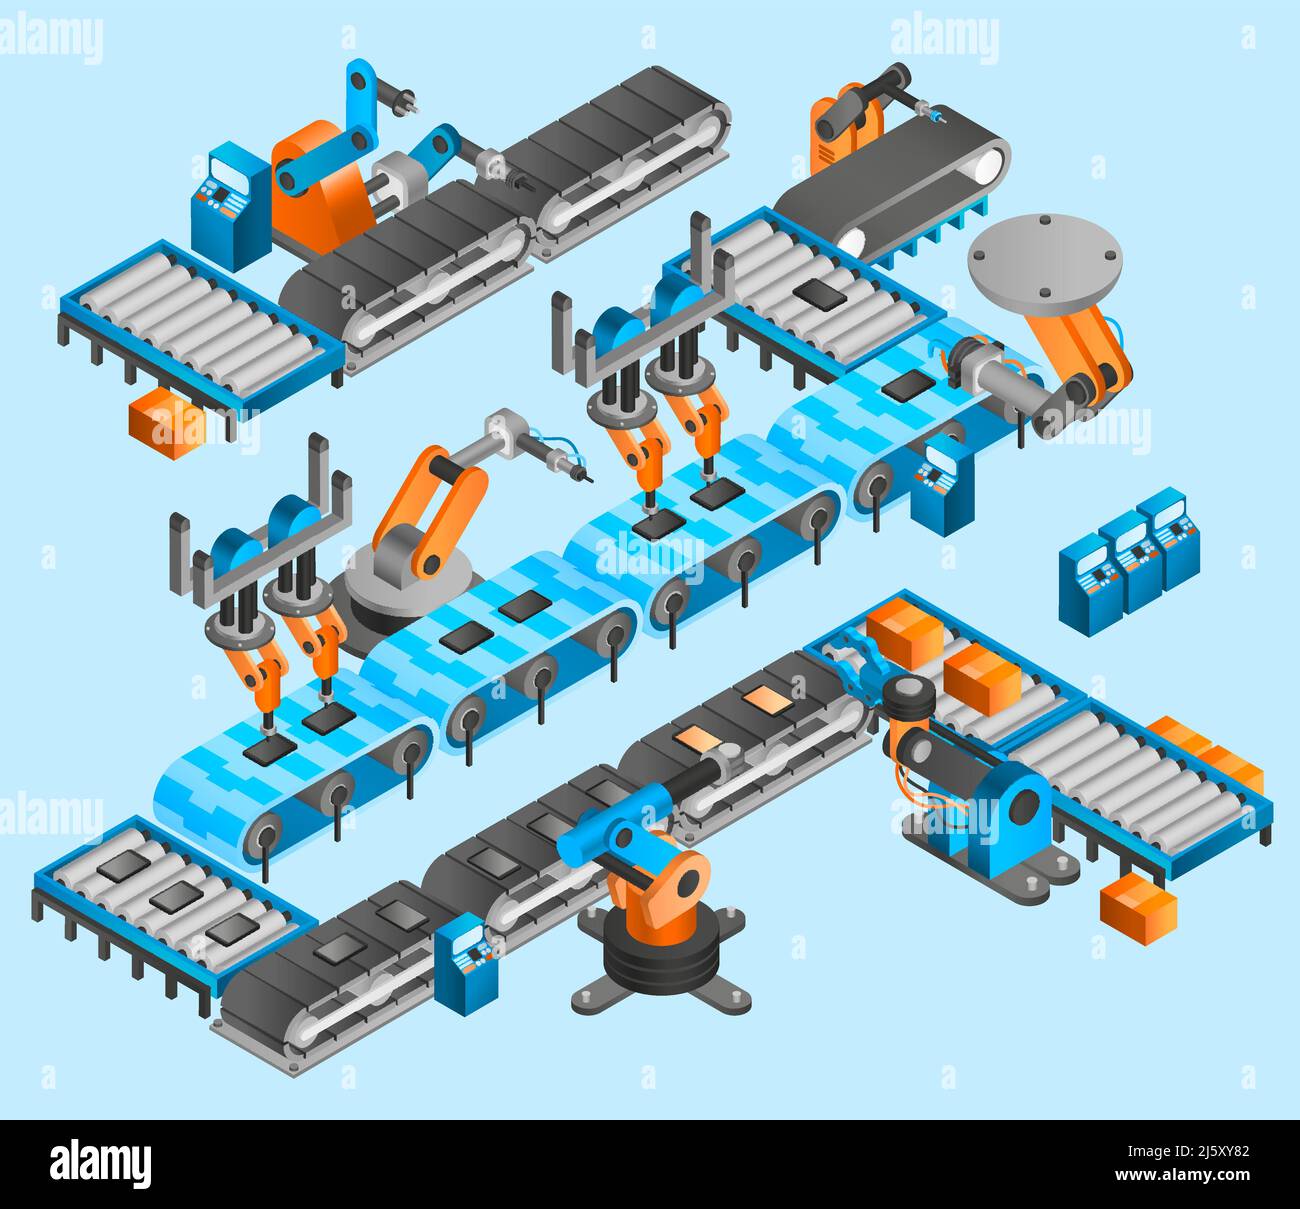 Industrial robot concept with isometric conveyor line and robotic arm manipulators vector illustration Stock Vector